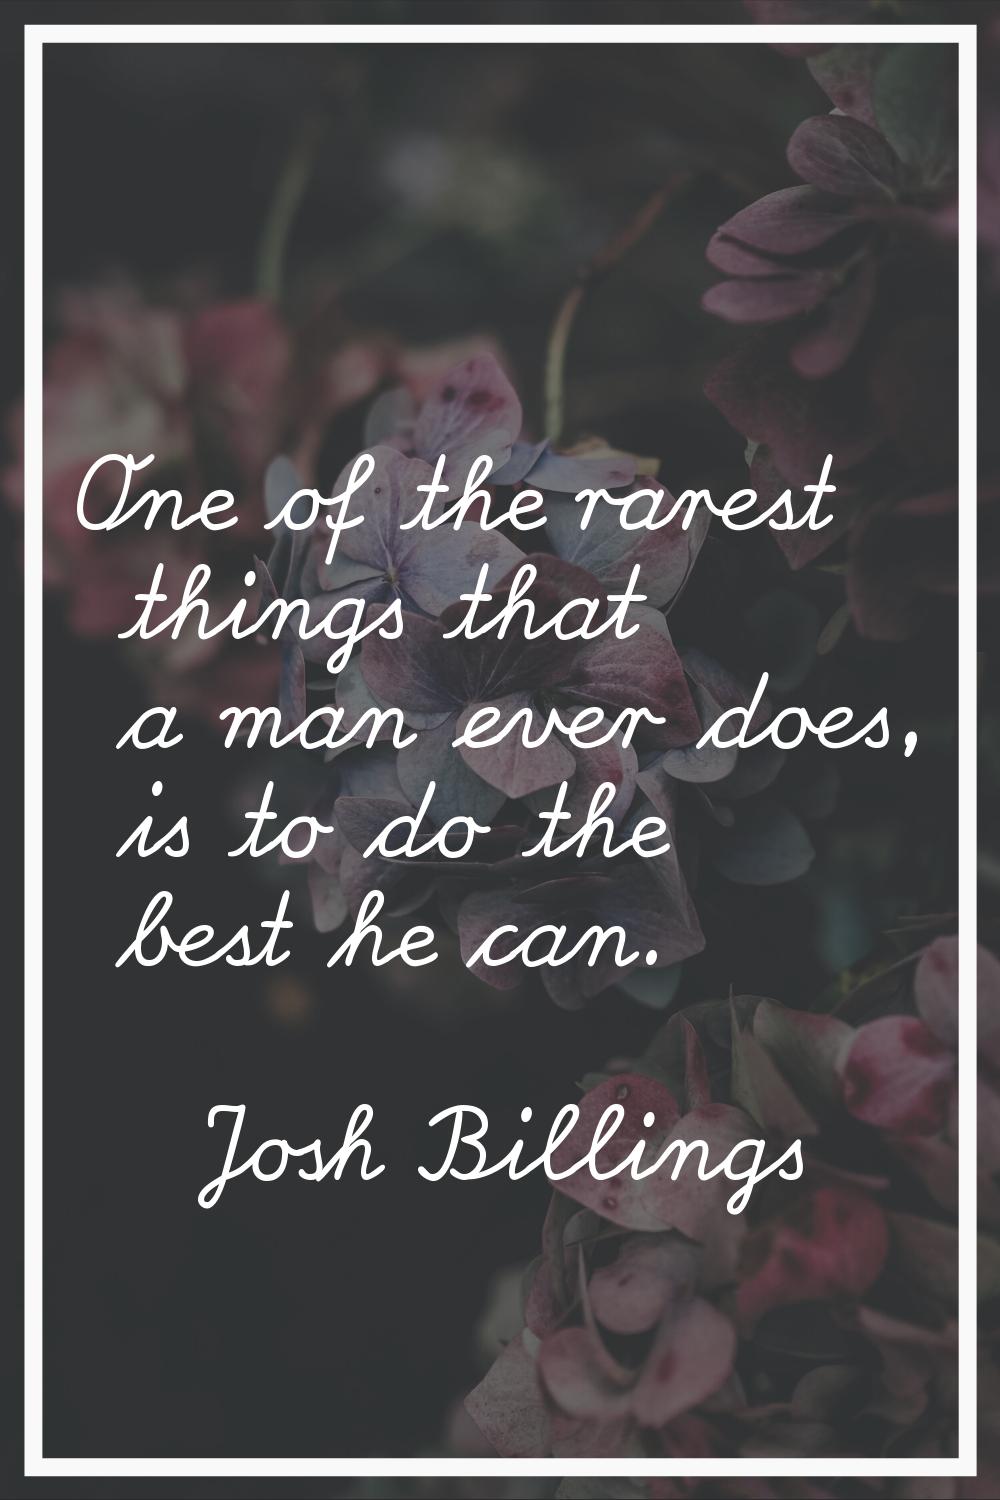 One of the rarest things that a man ever does, is to do the best he can.